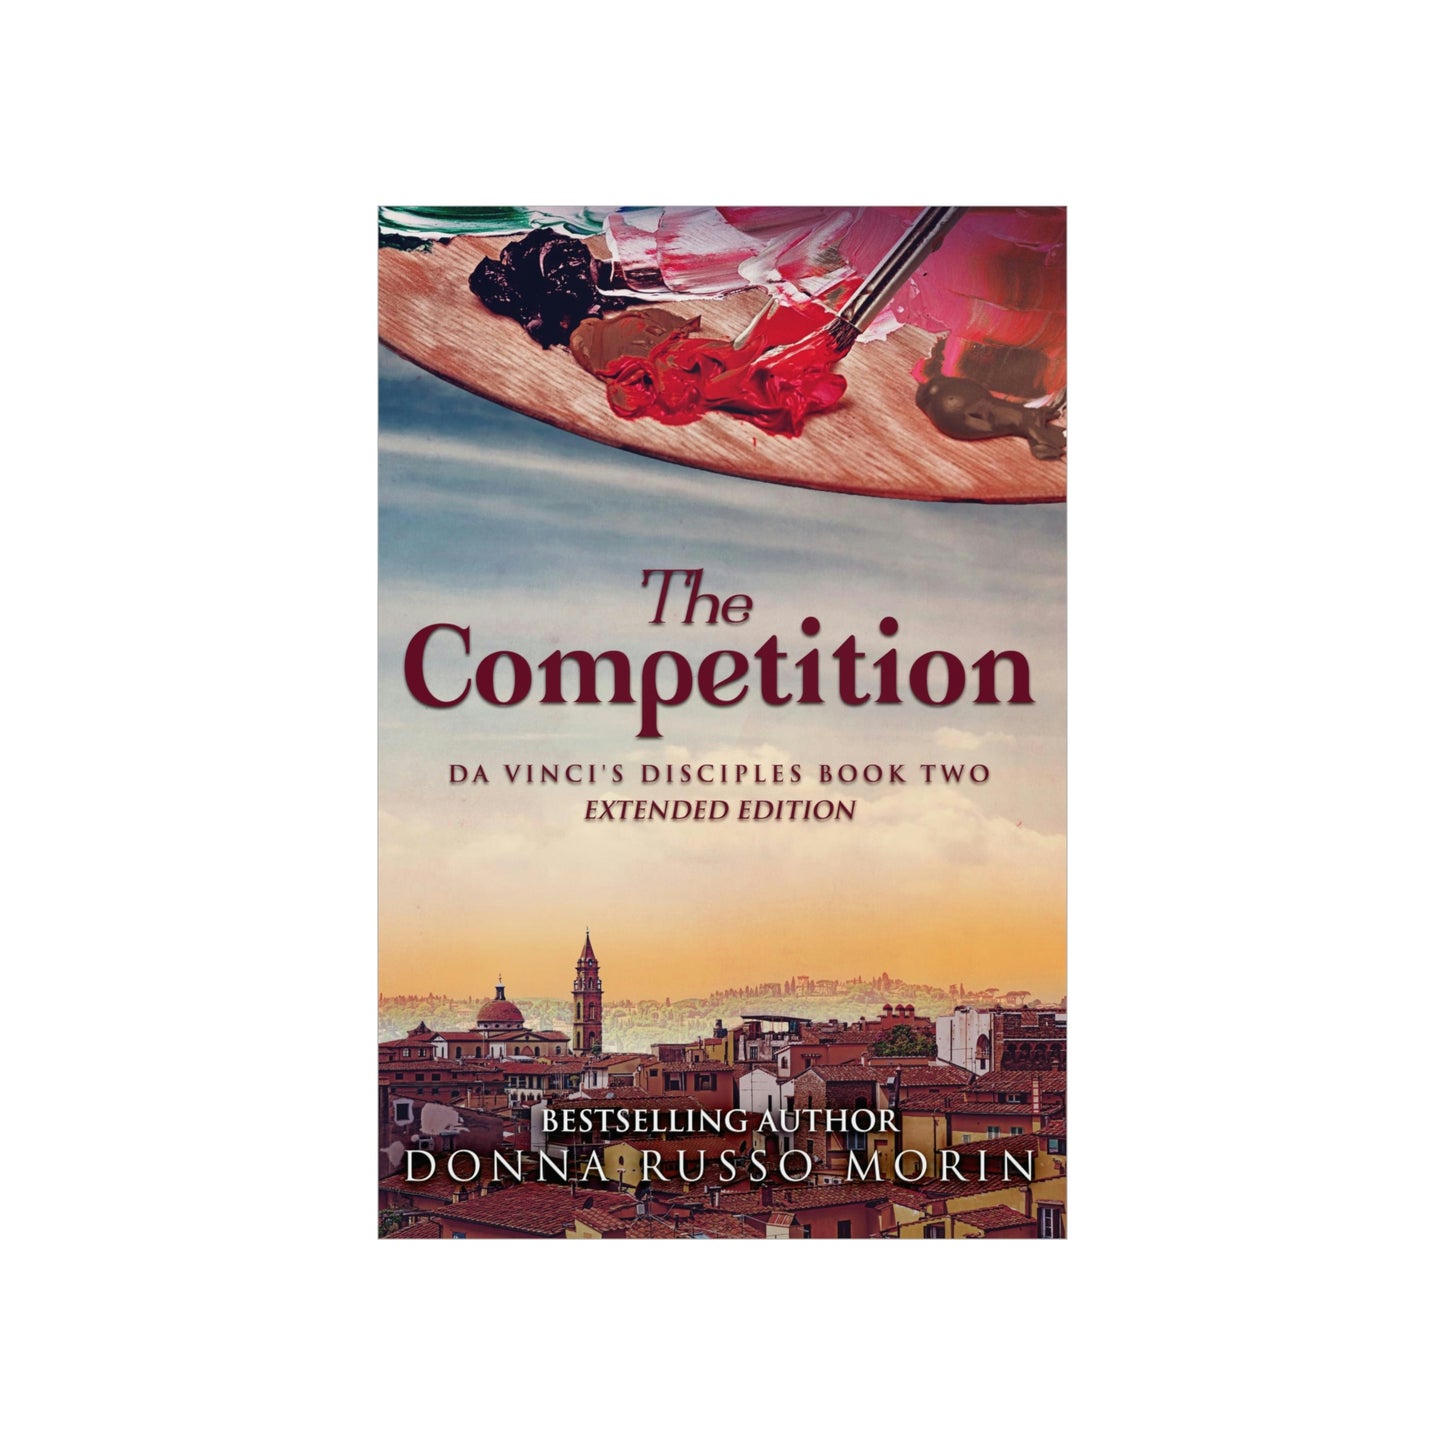 The Competition - Matte Poster